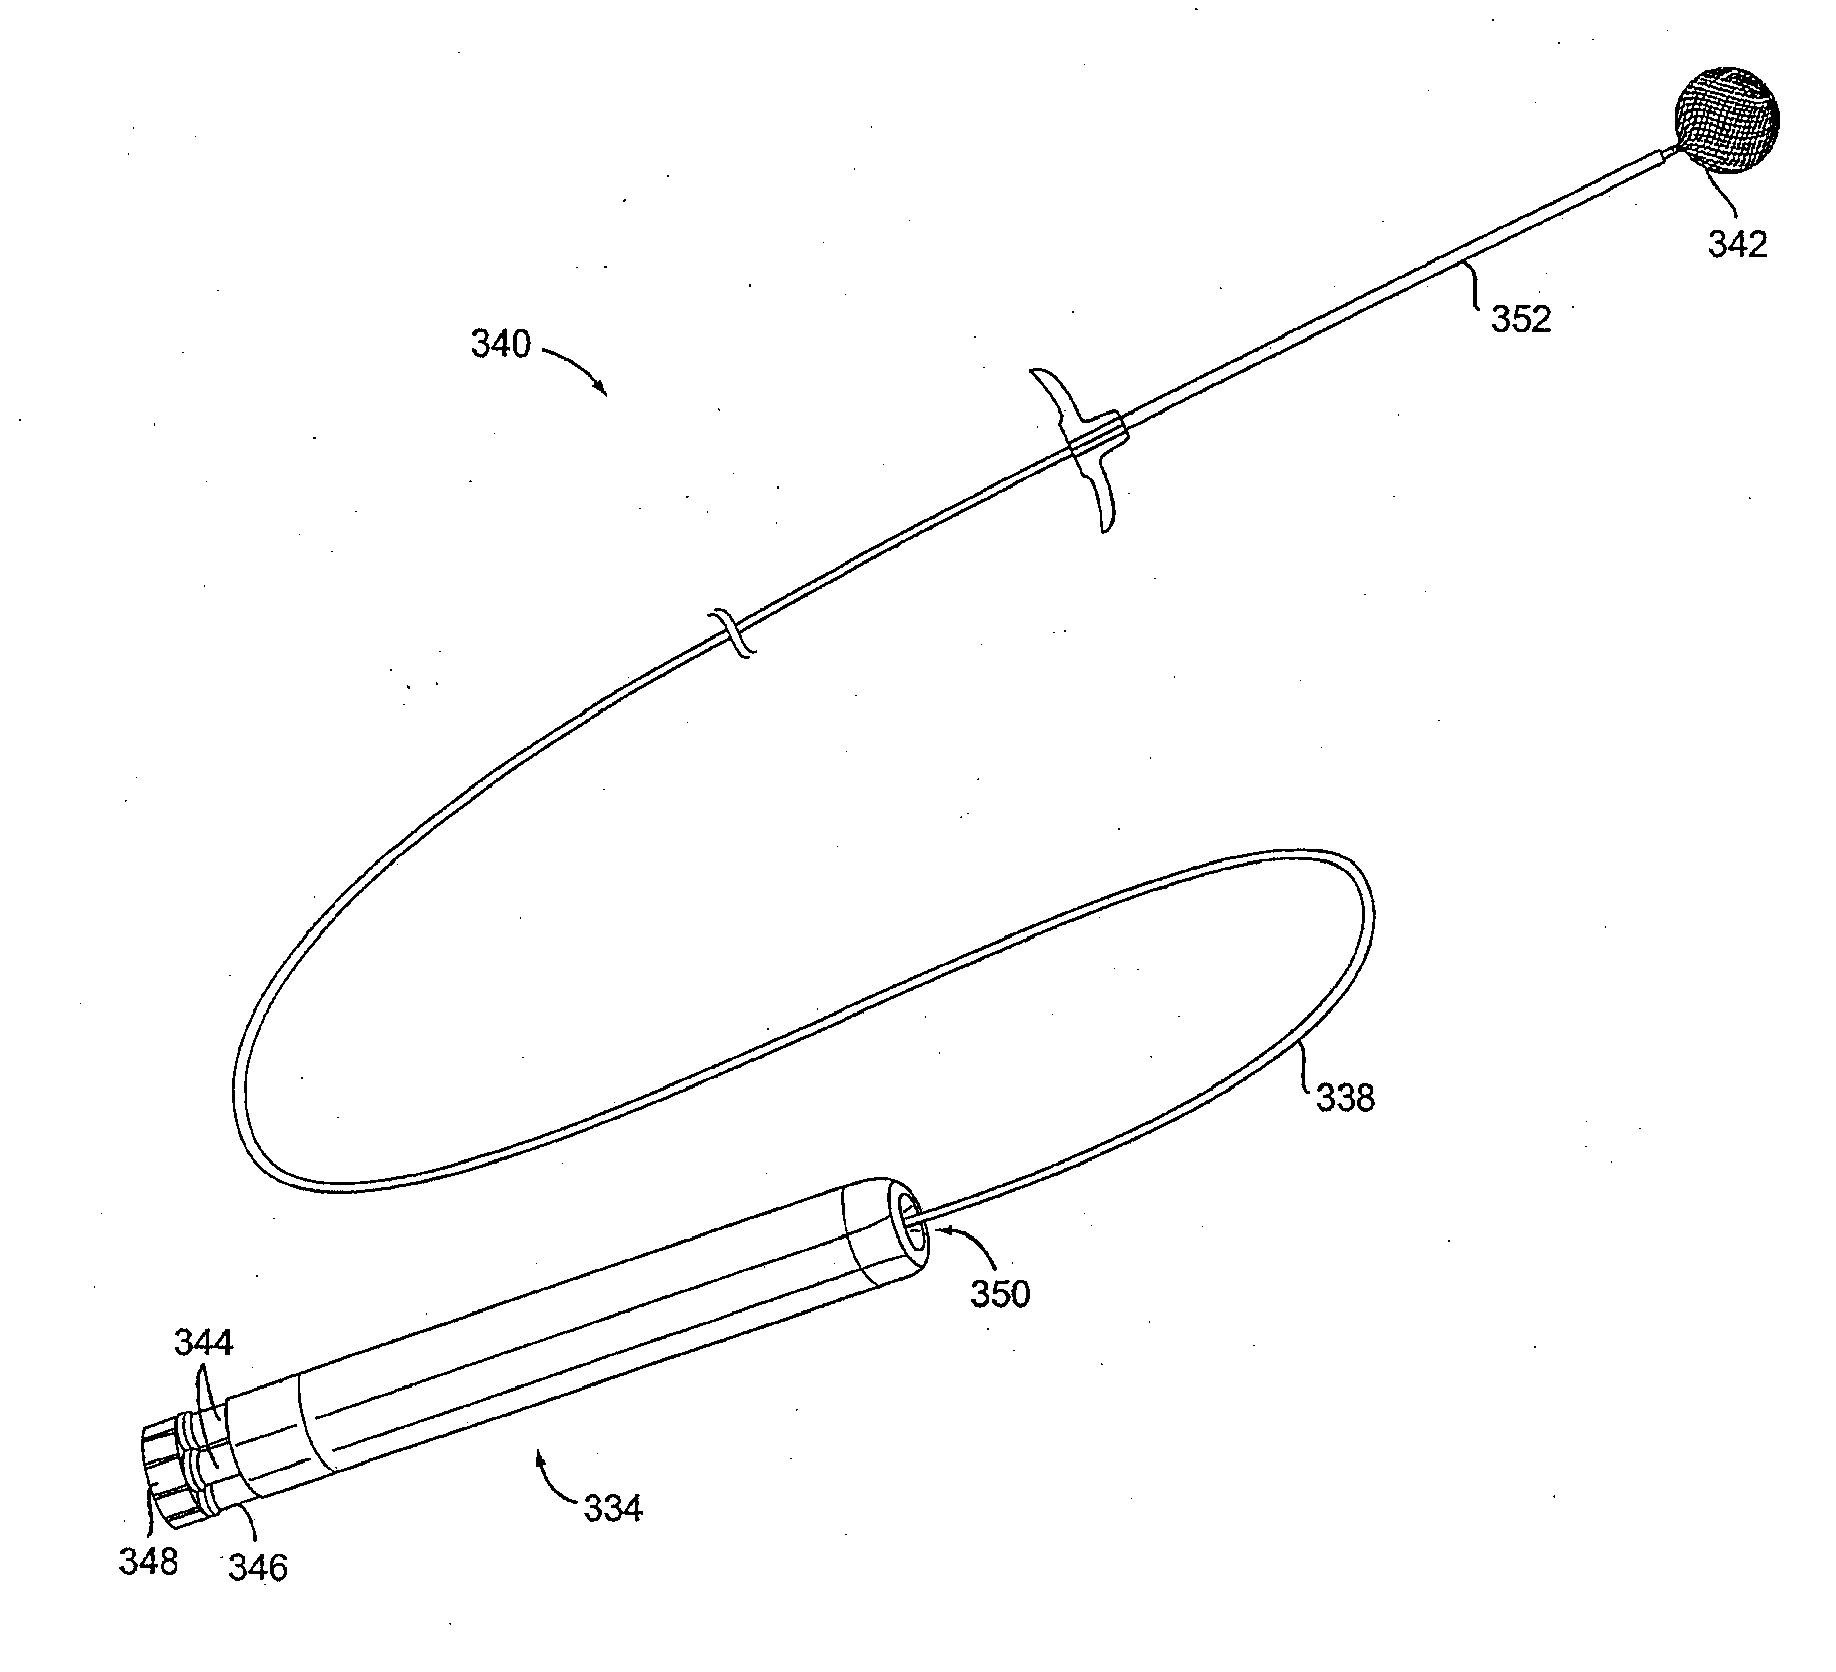 Methods For Making Braid-Ball Occlusion Devices